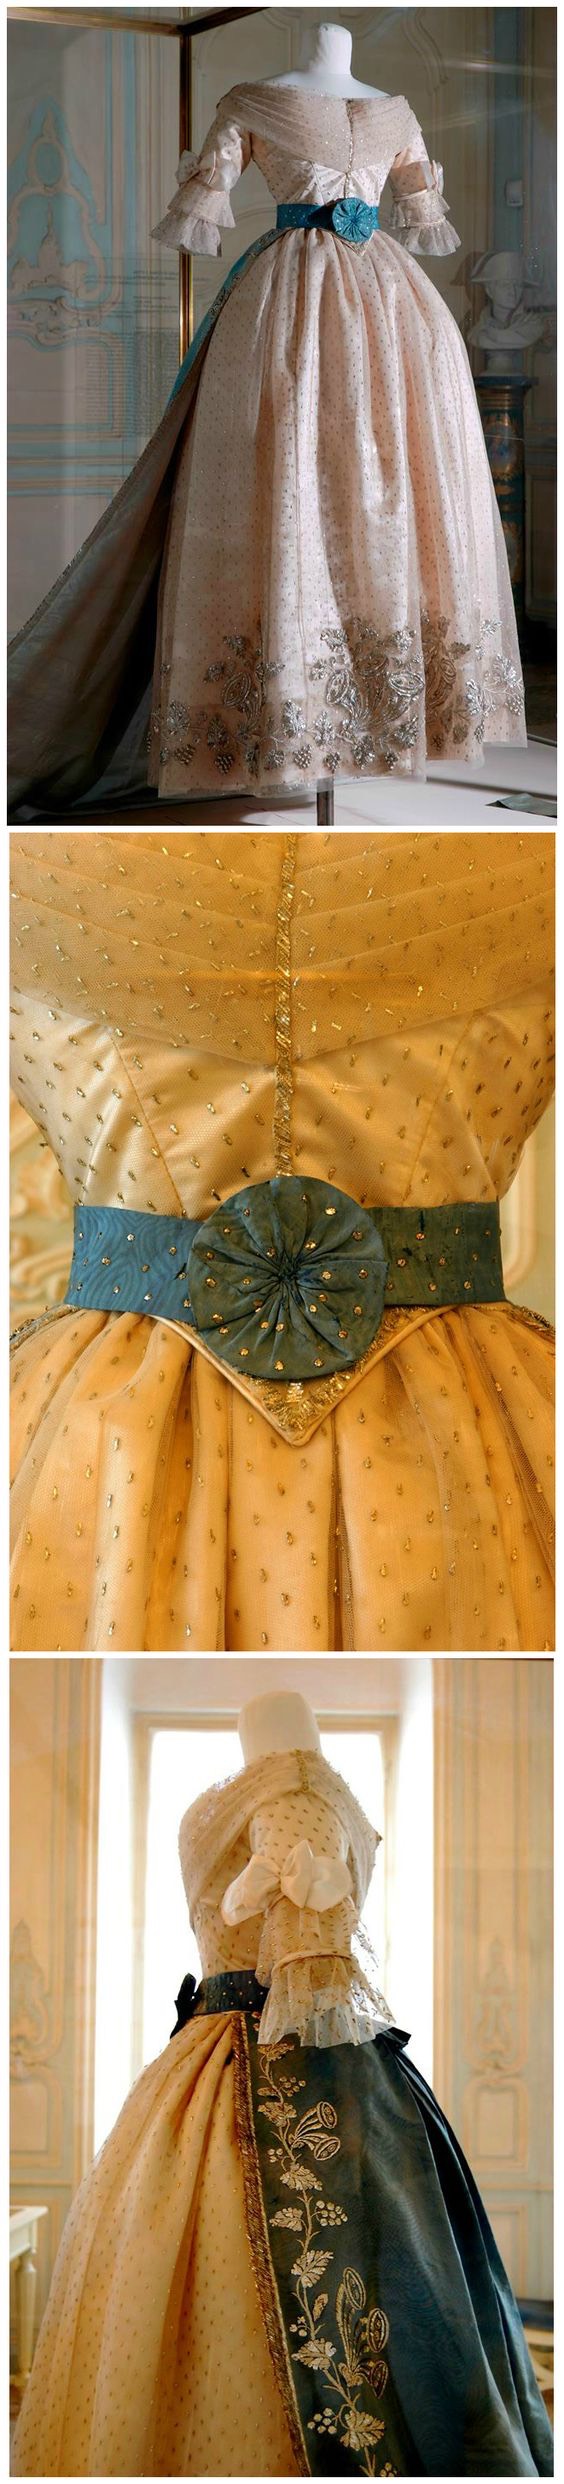 1838 (possibly) Court dress, possibly made in Paris of Marie Louise, Duchess of Parma empress consort of the French 1810 - 1814 (Museo Glauco Lombardi - Parma, Emilia-Romagna, Italy) From pinterest.com:domenxyz:ball-gown-1850s: